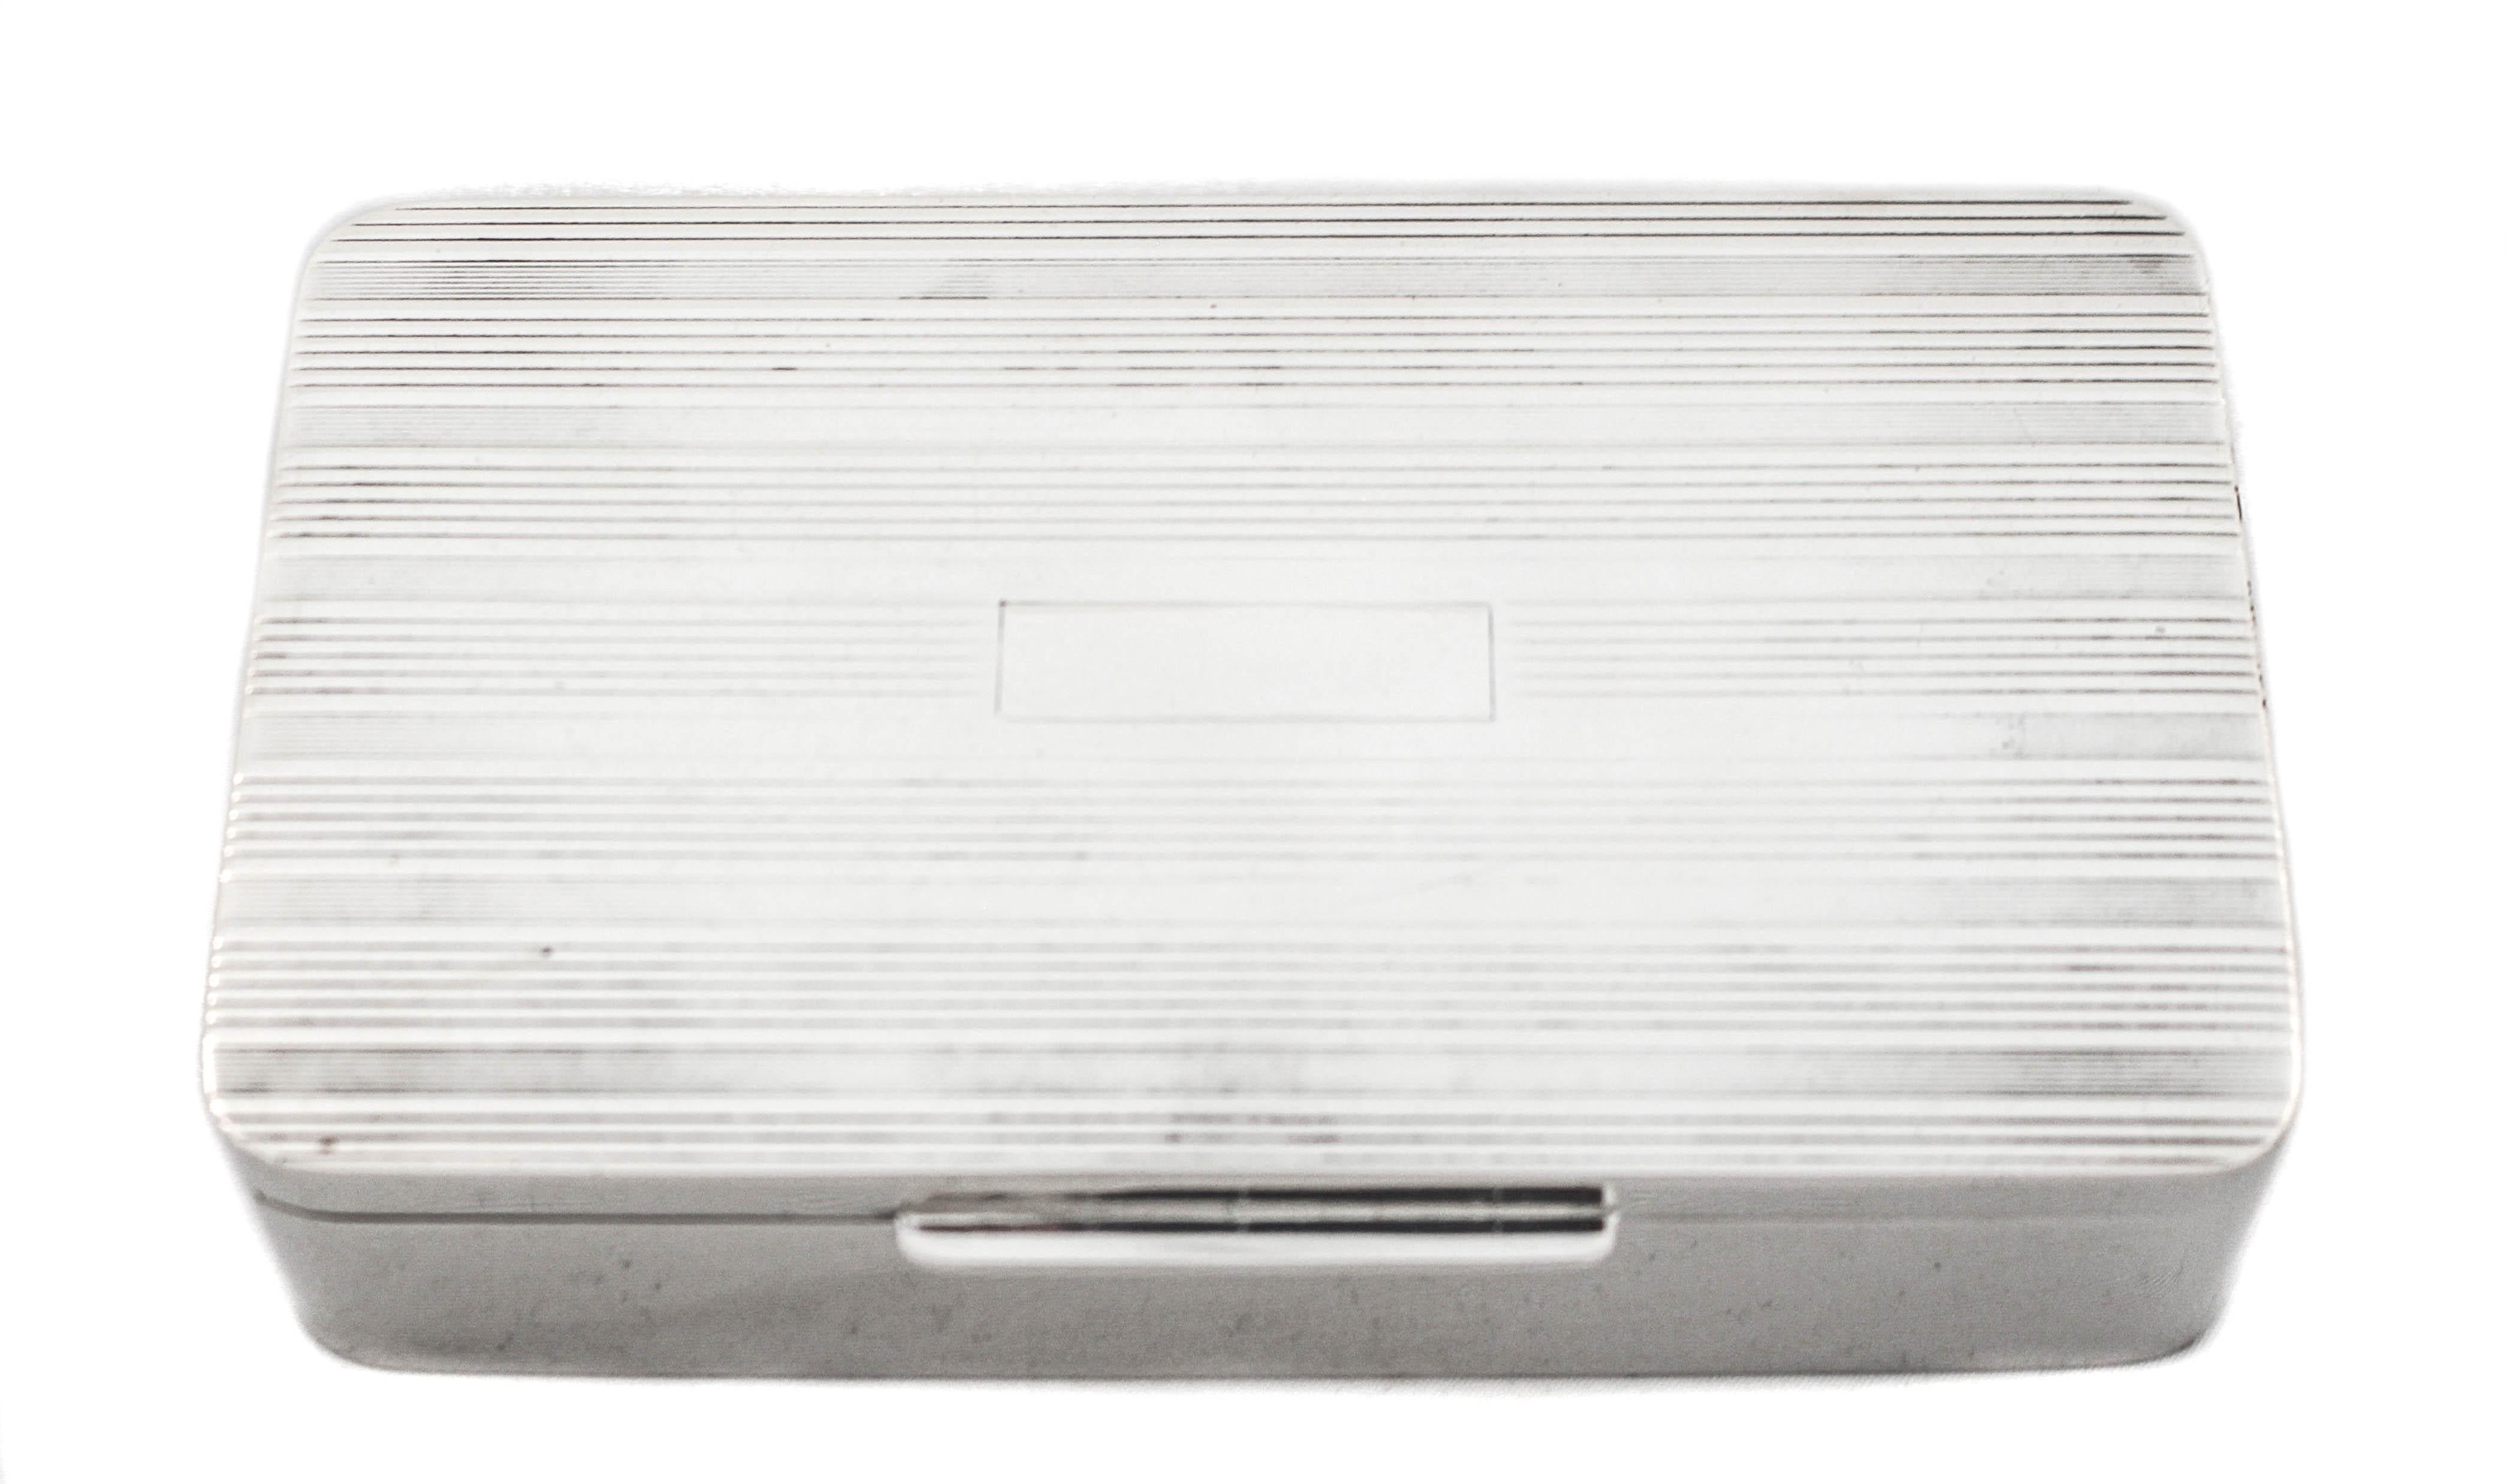 Being offered is a sterling silver mens jewelry box from the 1960’s.  It is sleek and masculine and the perfect size for cufflinks, watches and other accessories.  The lid has a pinstriped pattern and in the center a (rectangular)cartouche for a